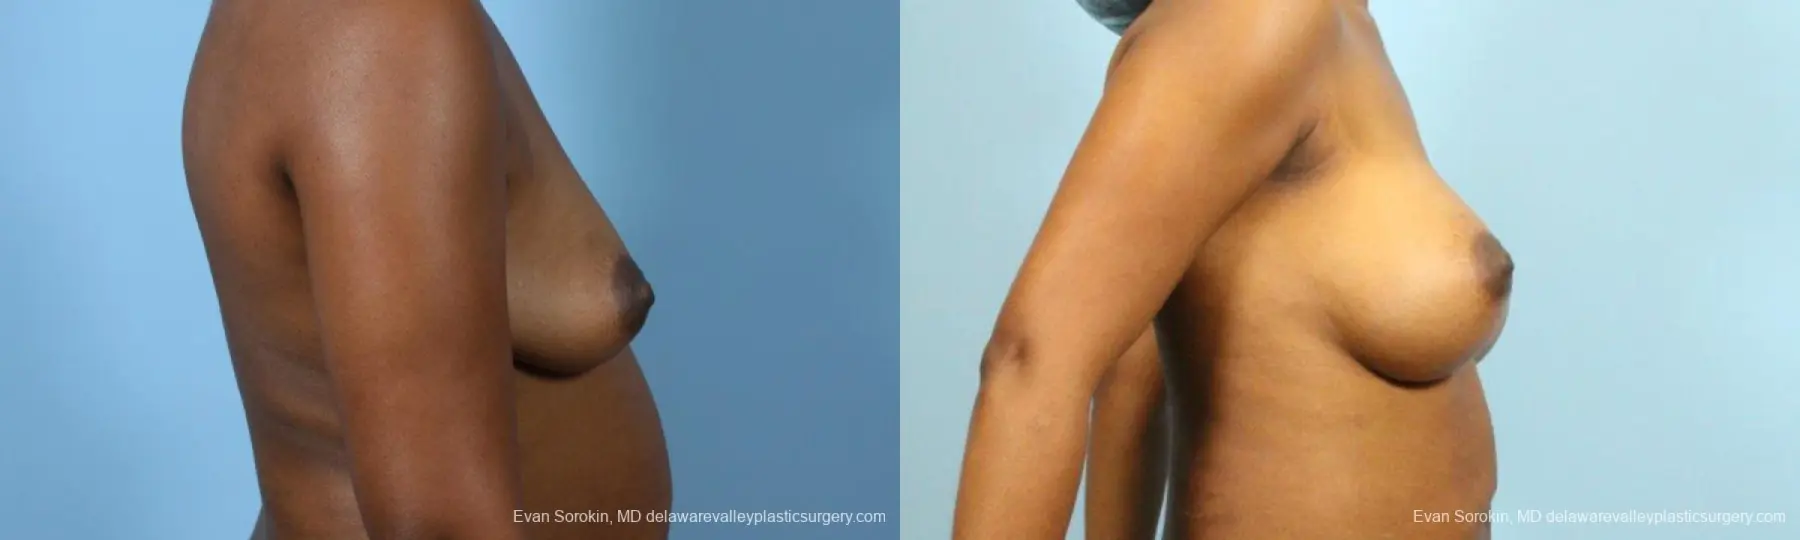 Philadelphia Breast Augmentation 9173 - Before and After 3